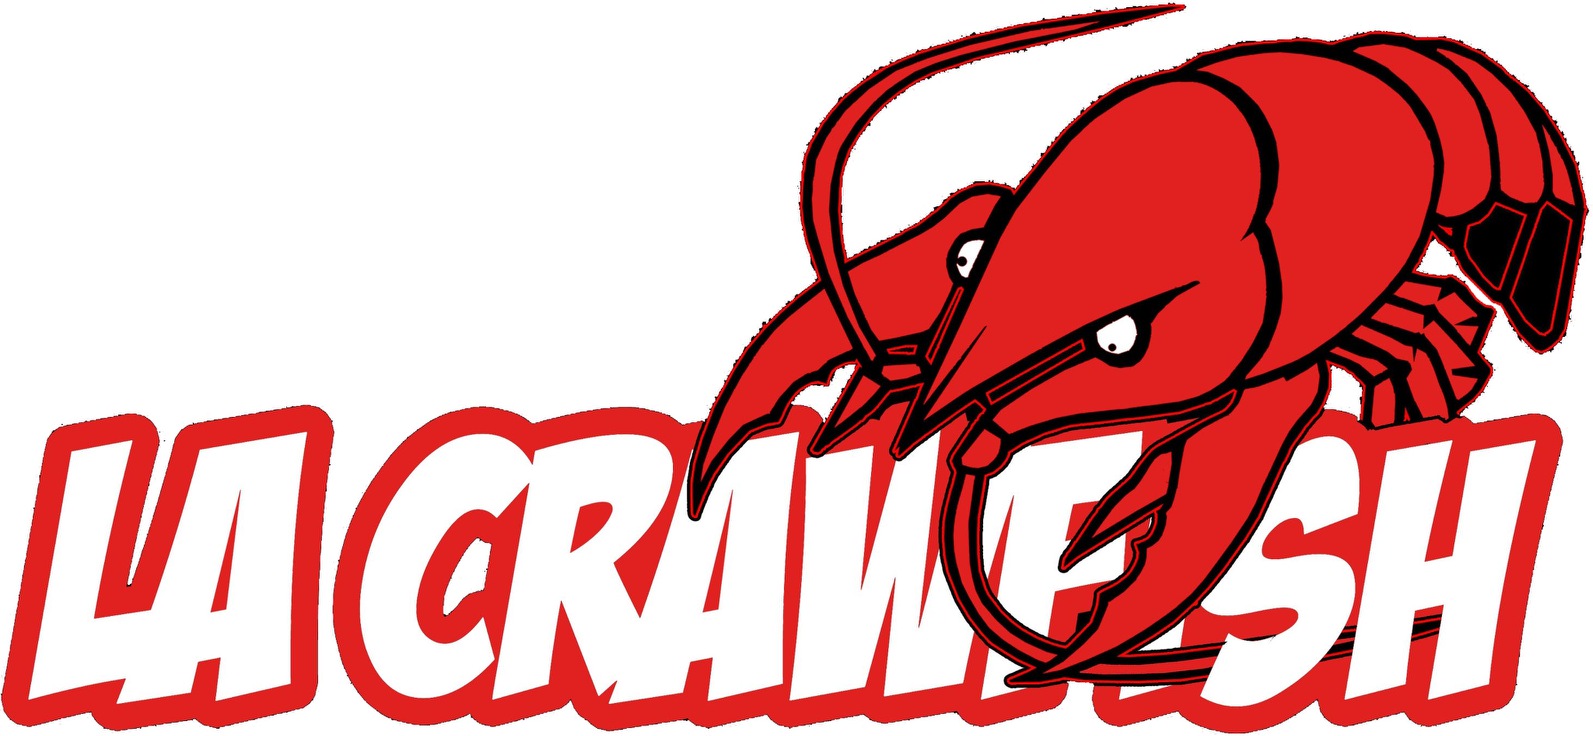 LA Crawfish Opens in Webster, Texas | All-Star Franchise Development